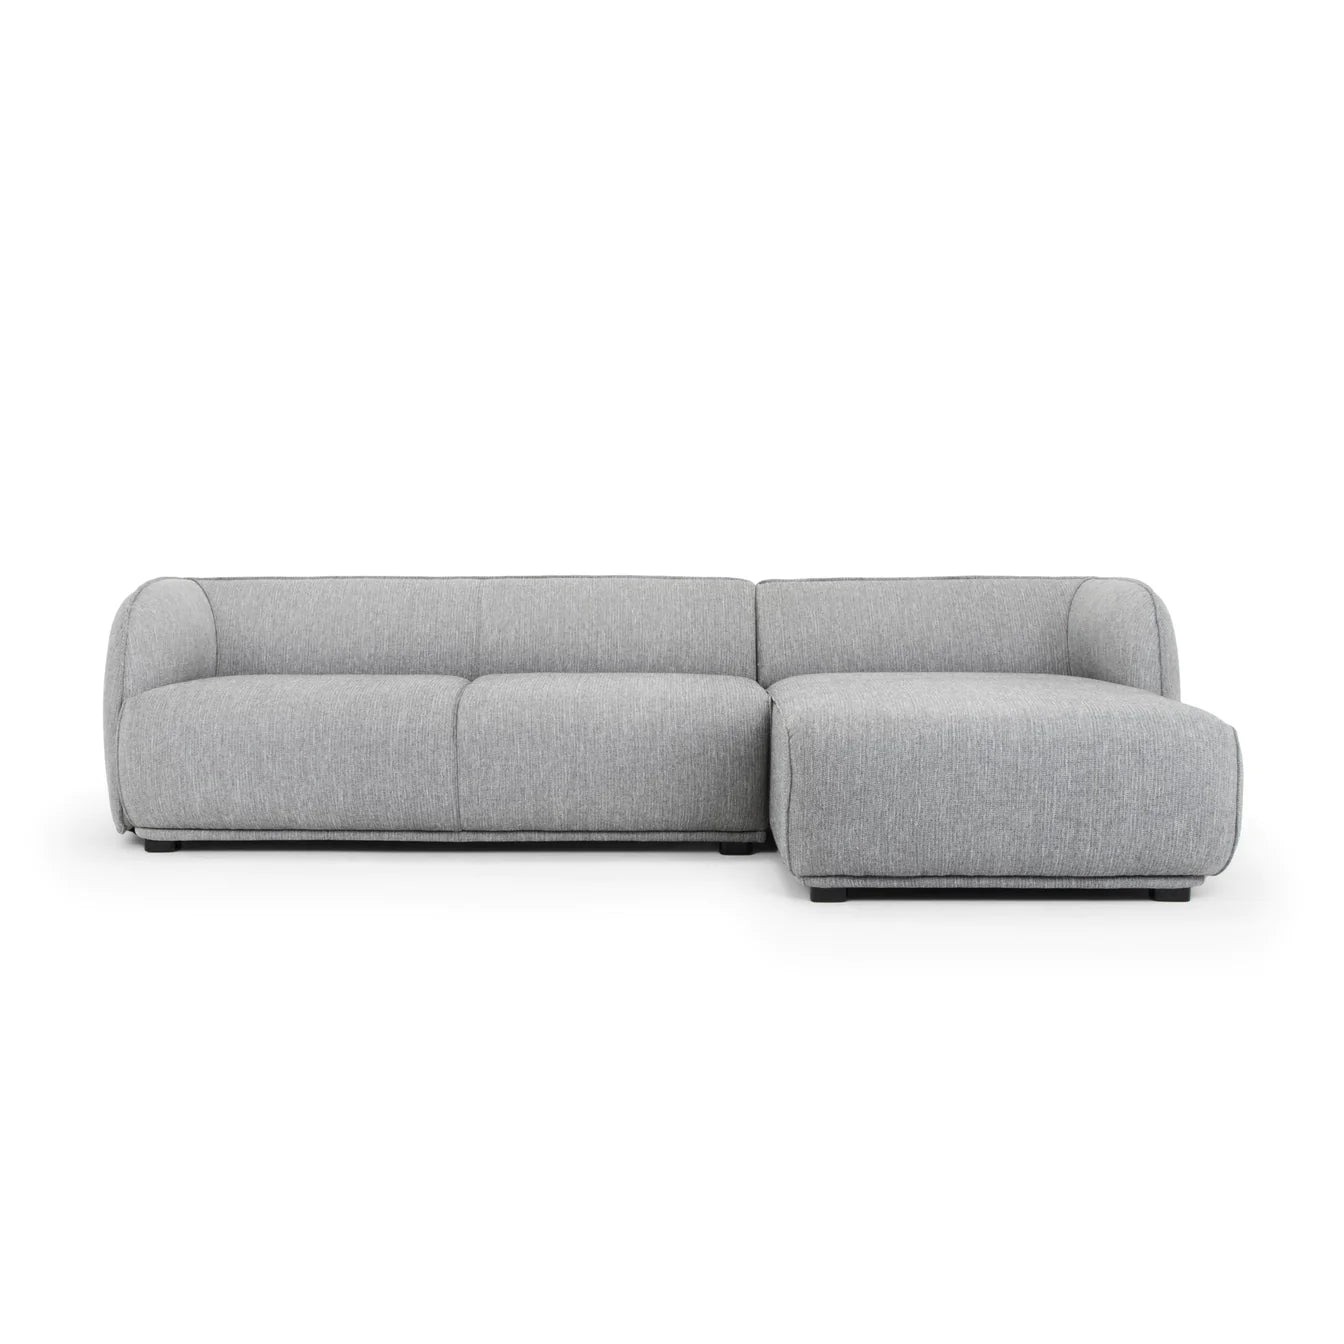 Troy 3 Seater Right Chaise Sofa (Graphite Grey)